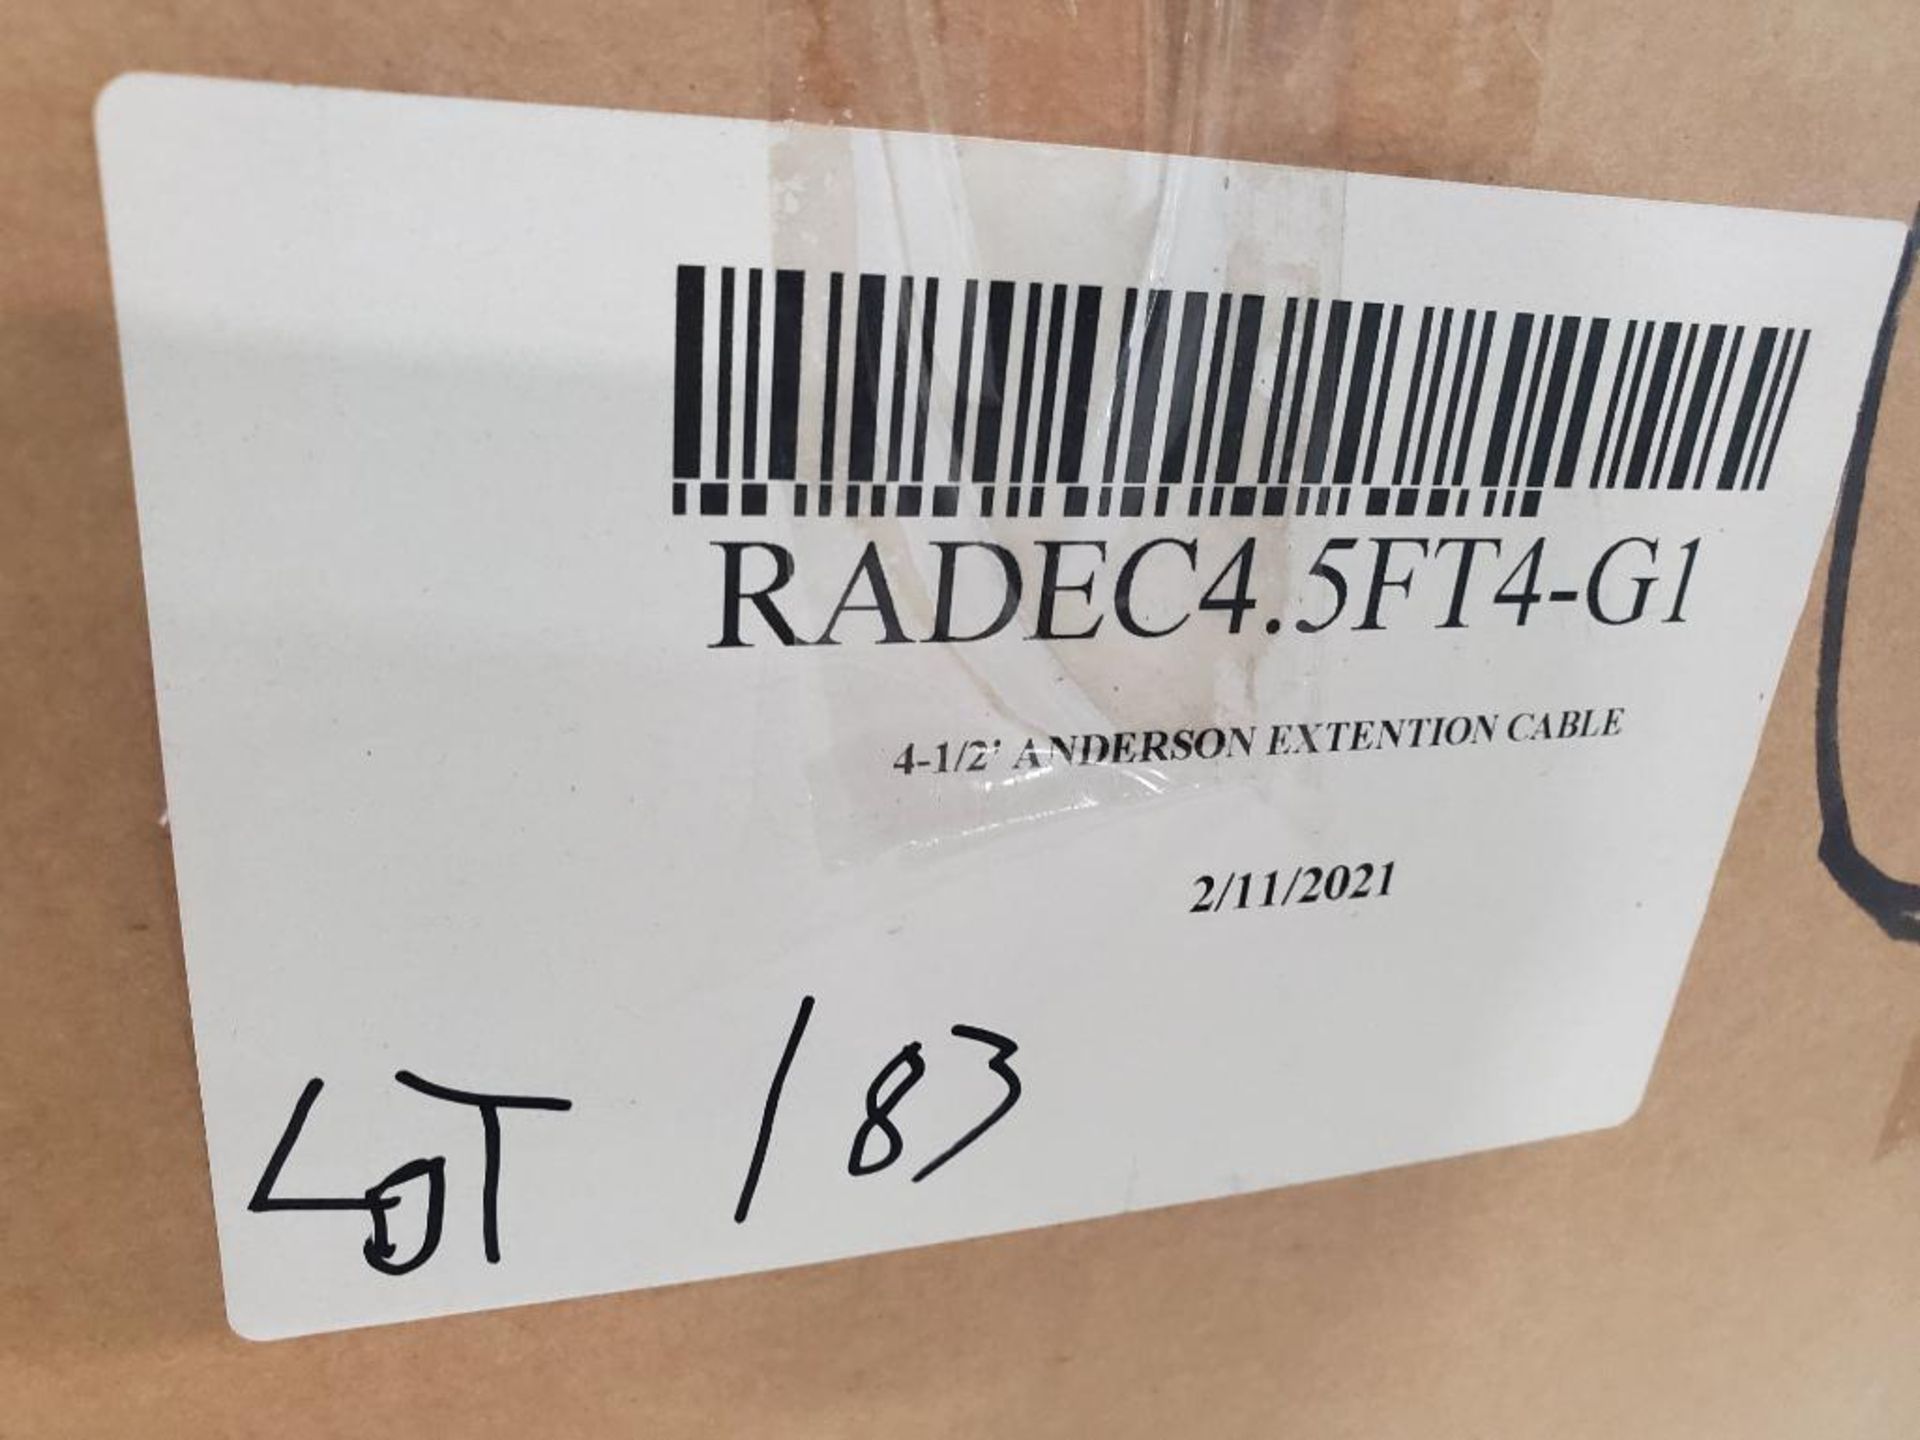 Qty 50 - Anderson 4.5ft battery extension cable. RADEC4.5FT4-G1. 175A, 600V plug. New in box. - Image 4 of 6